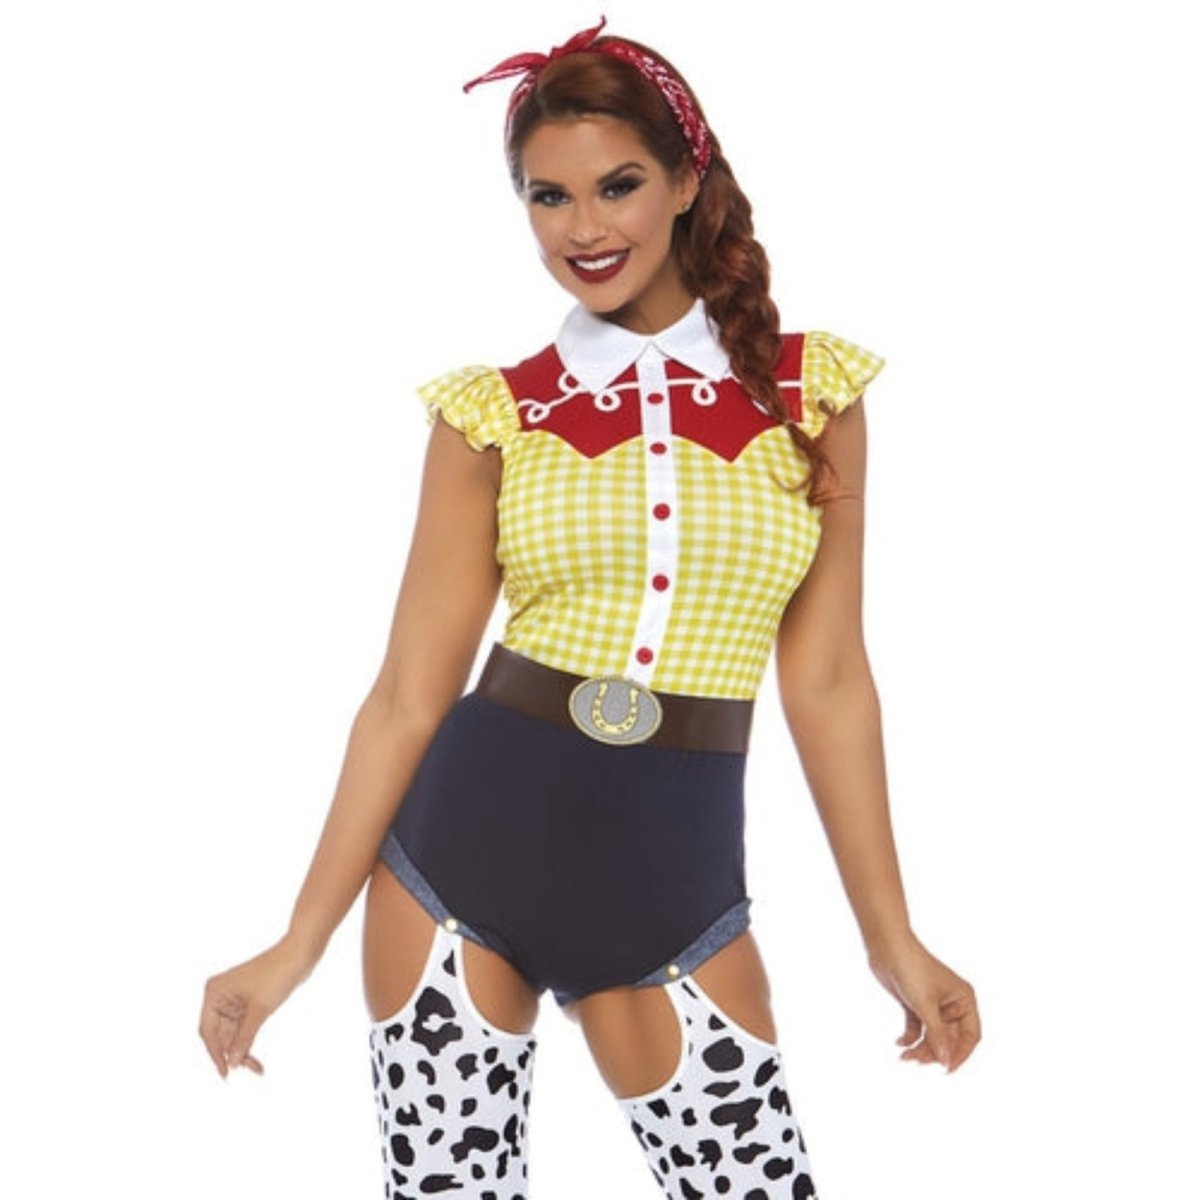 Giddy Up Cowgirl Women’s Costume - worldclasscostumes